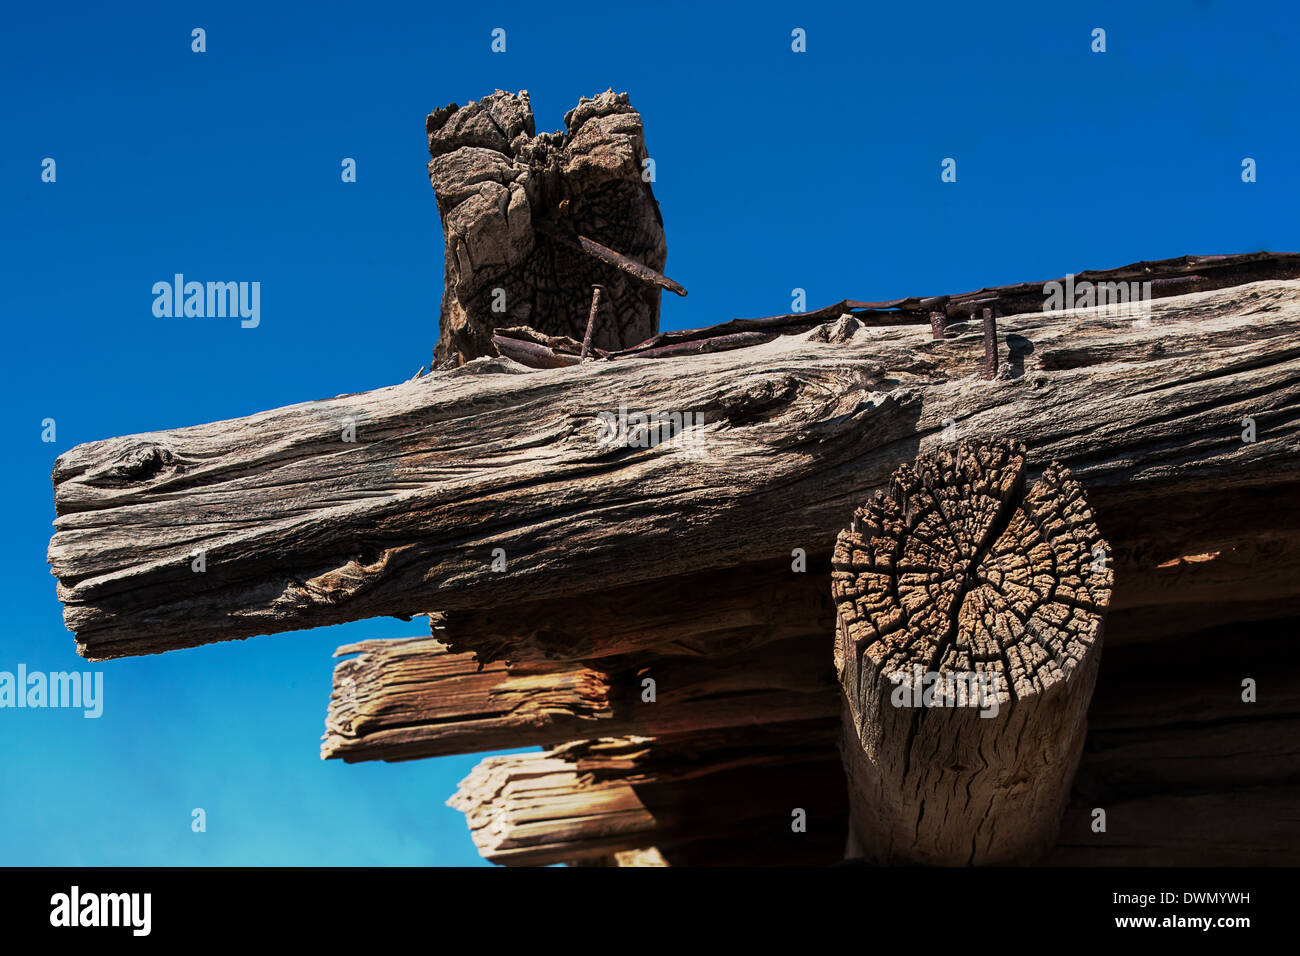 A corner of the roof of a log home in the desert that has seen better days Stock Photo